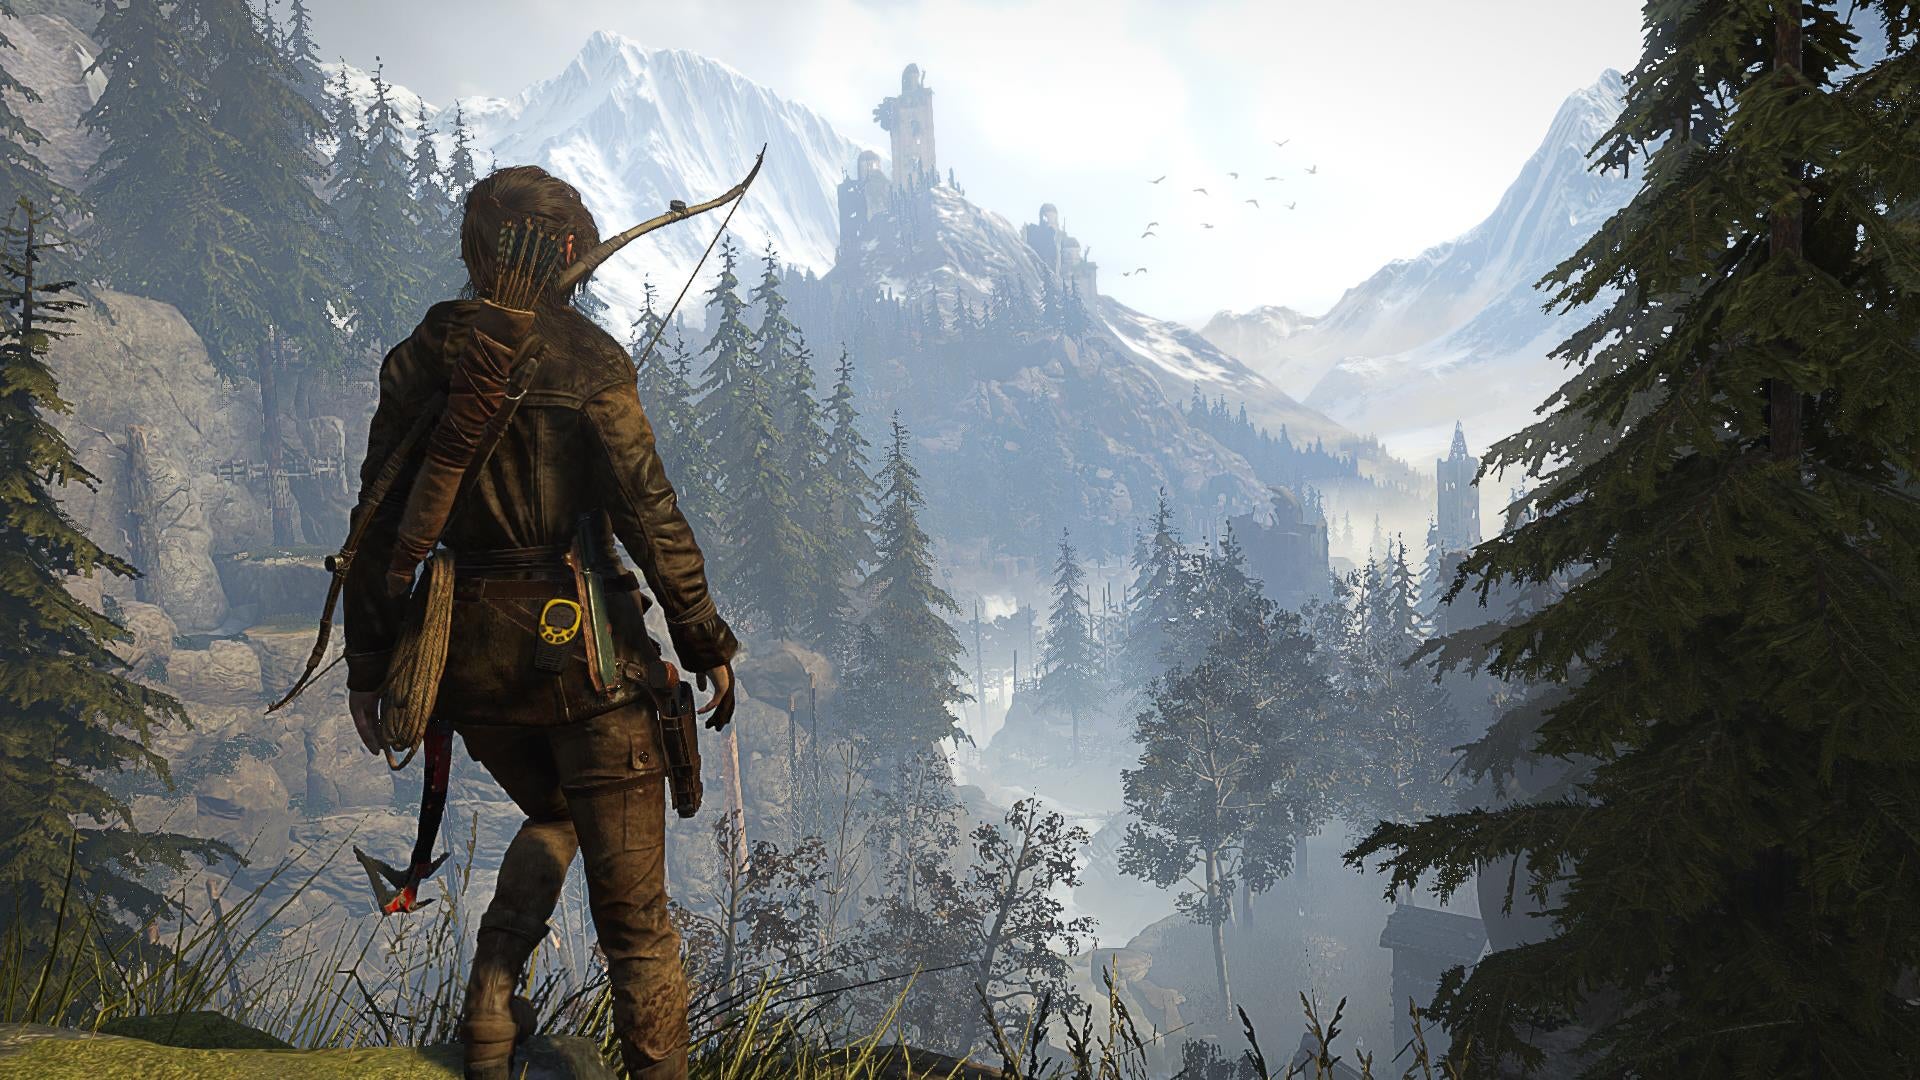 Image for Rise of the Tomb Raider has convinced me to buy an Xbox One